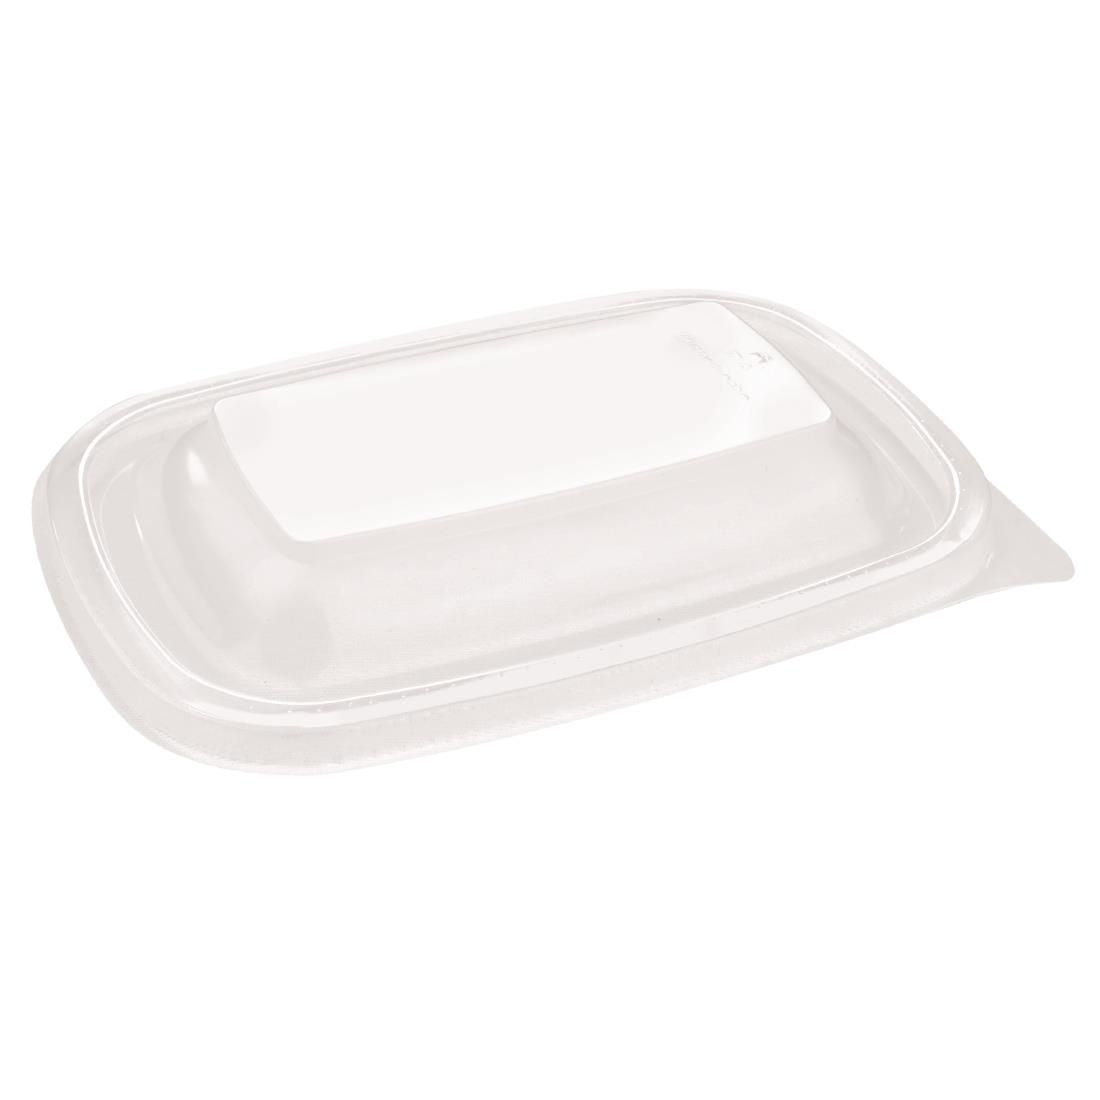 Fastpac Small Rectangular Food Container Lids 500ml / 17oz JD Catering Equipment Solutions Ltd